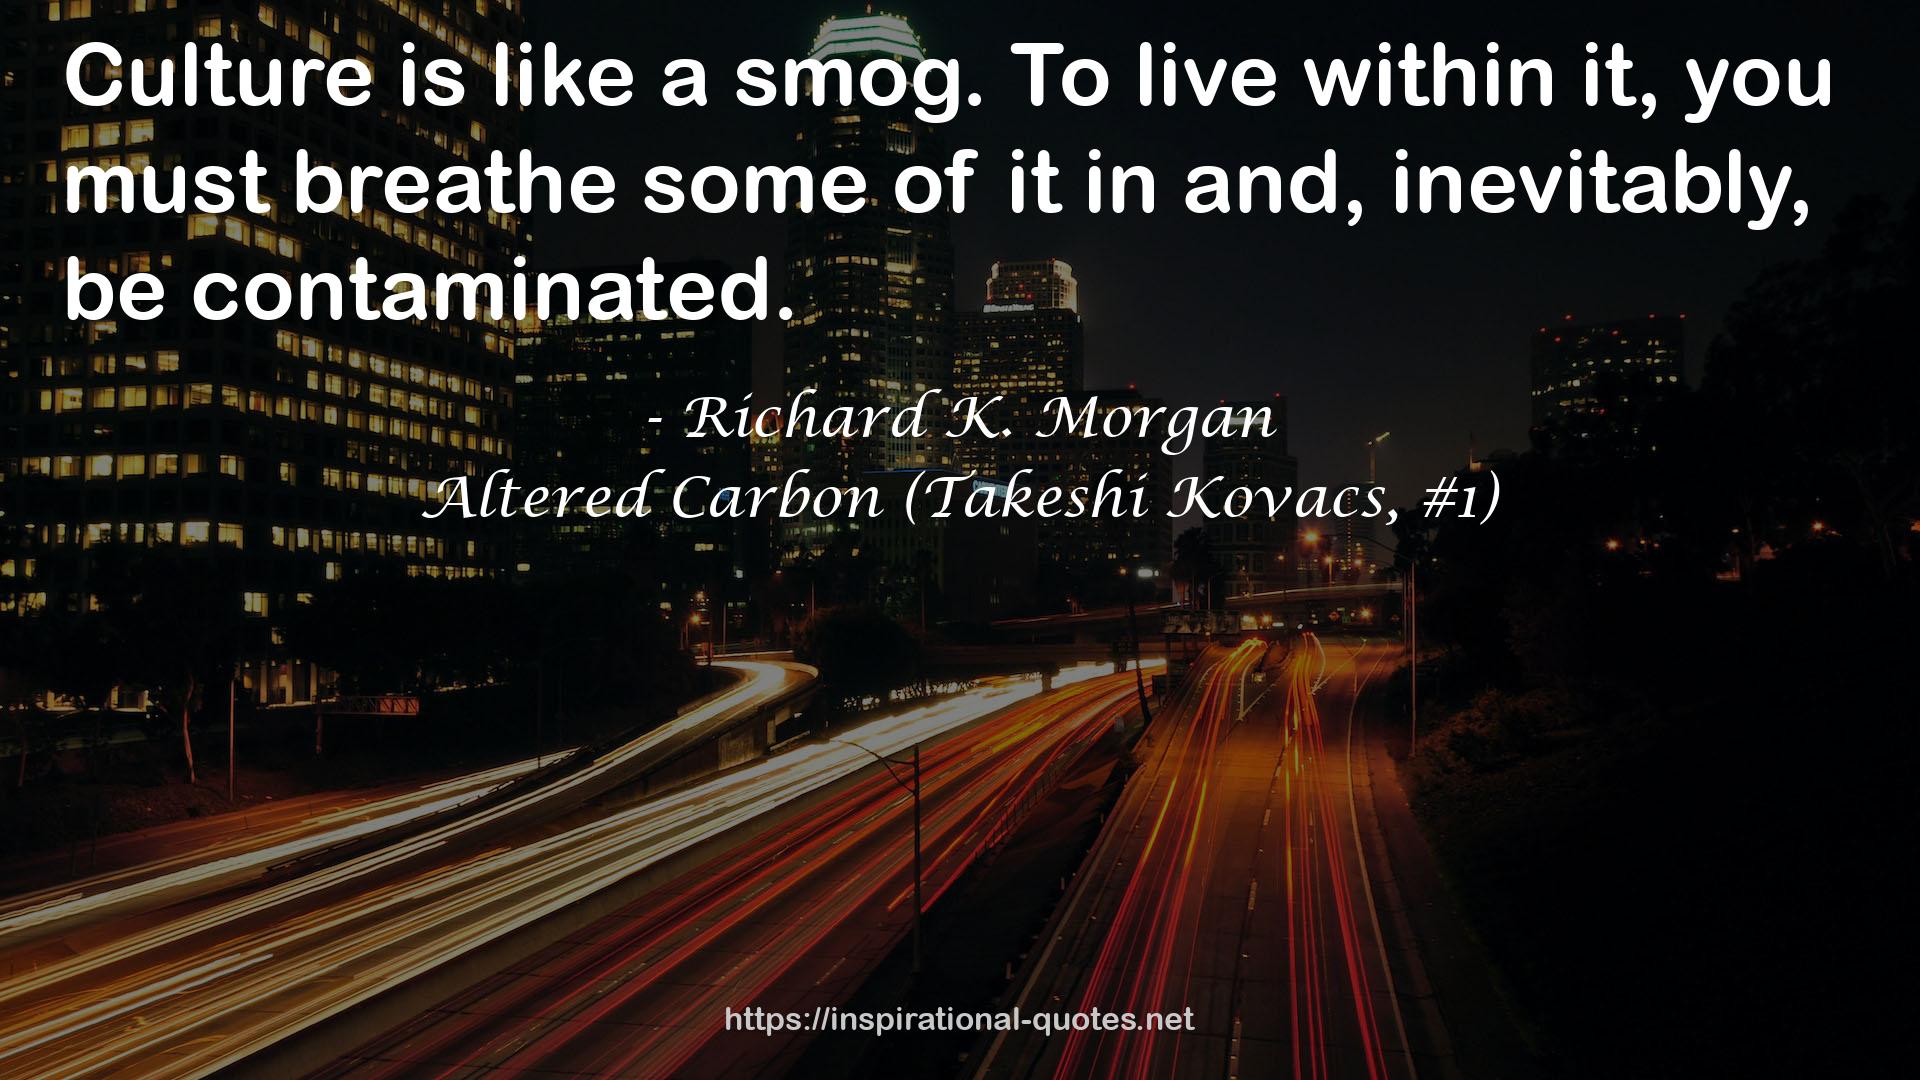 Altered Carbon (Takeshi Kovacs, #1) QUOTES